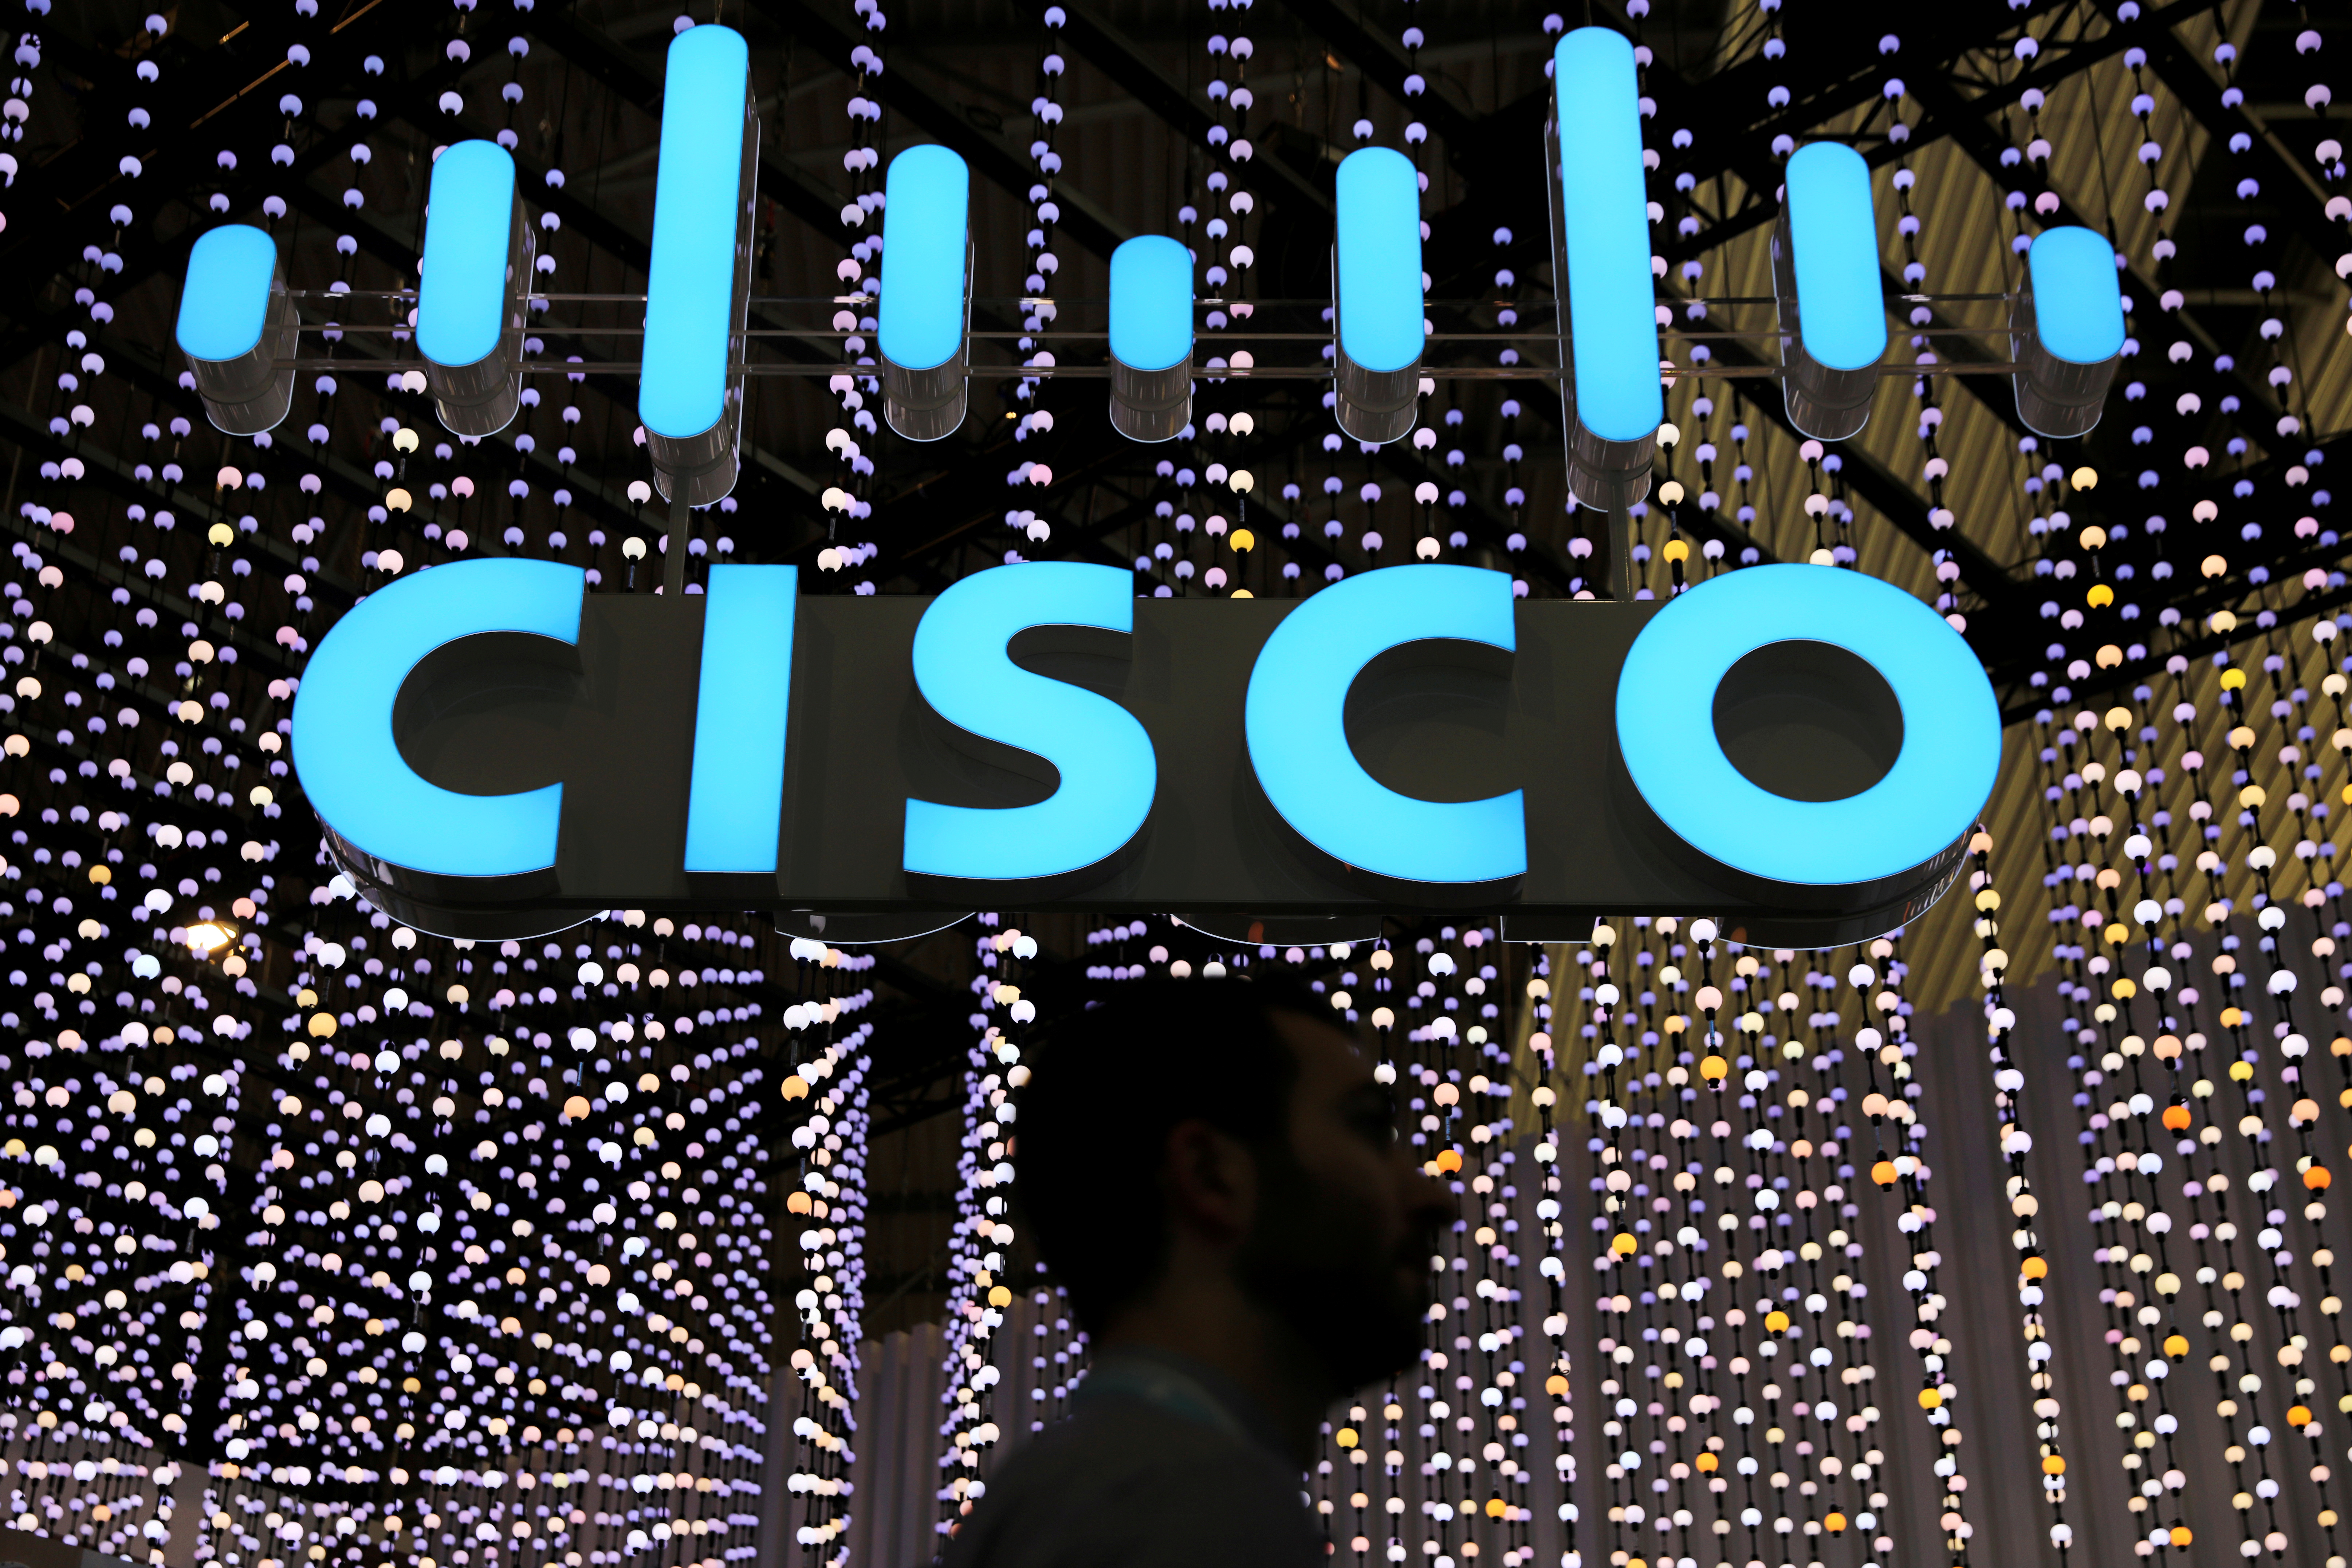 FILE PHOTO: A man passes under a Cisco sign at the Mobile World Congress in Barcelona